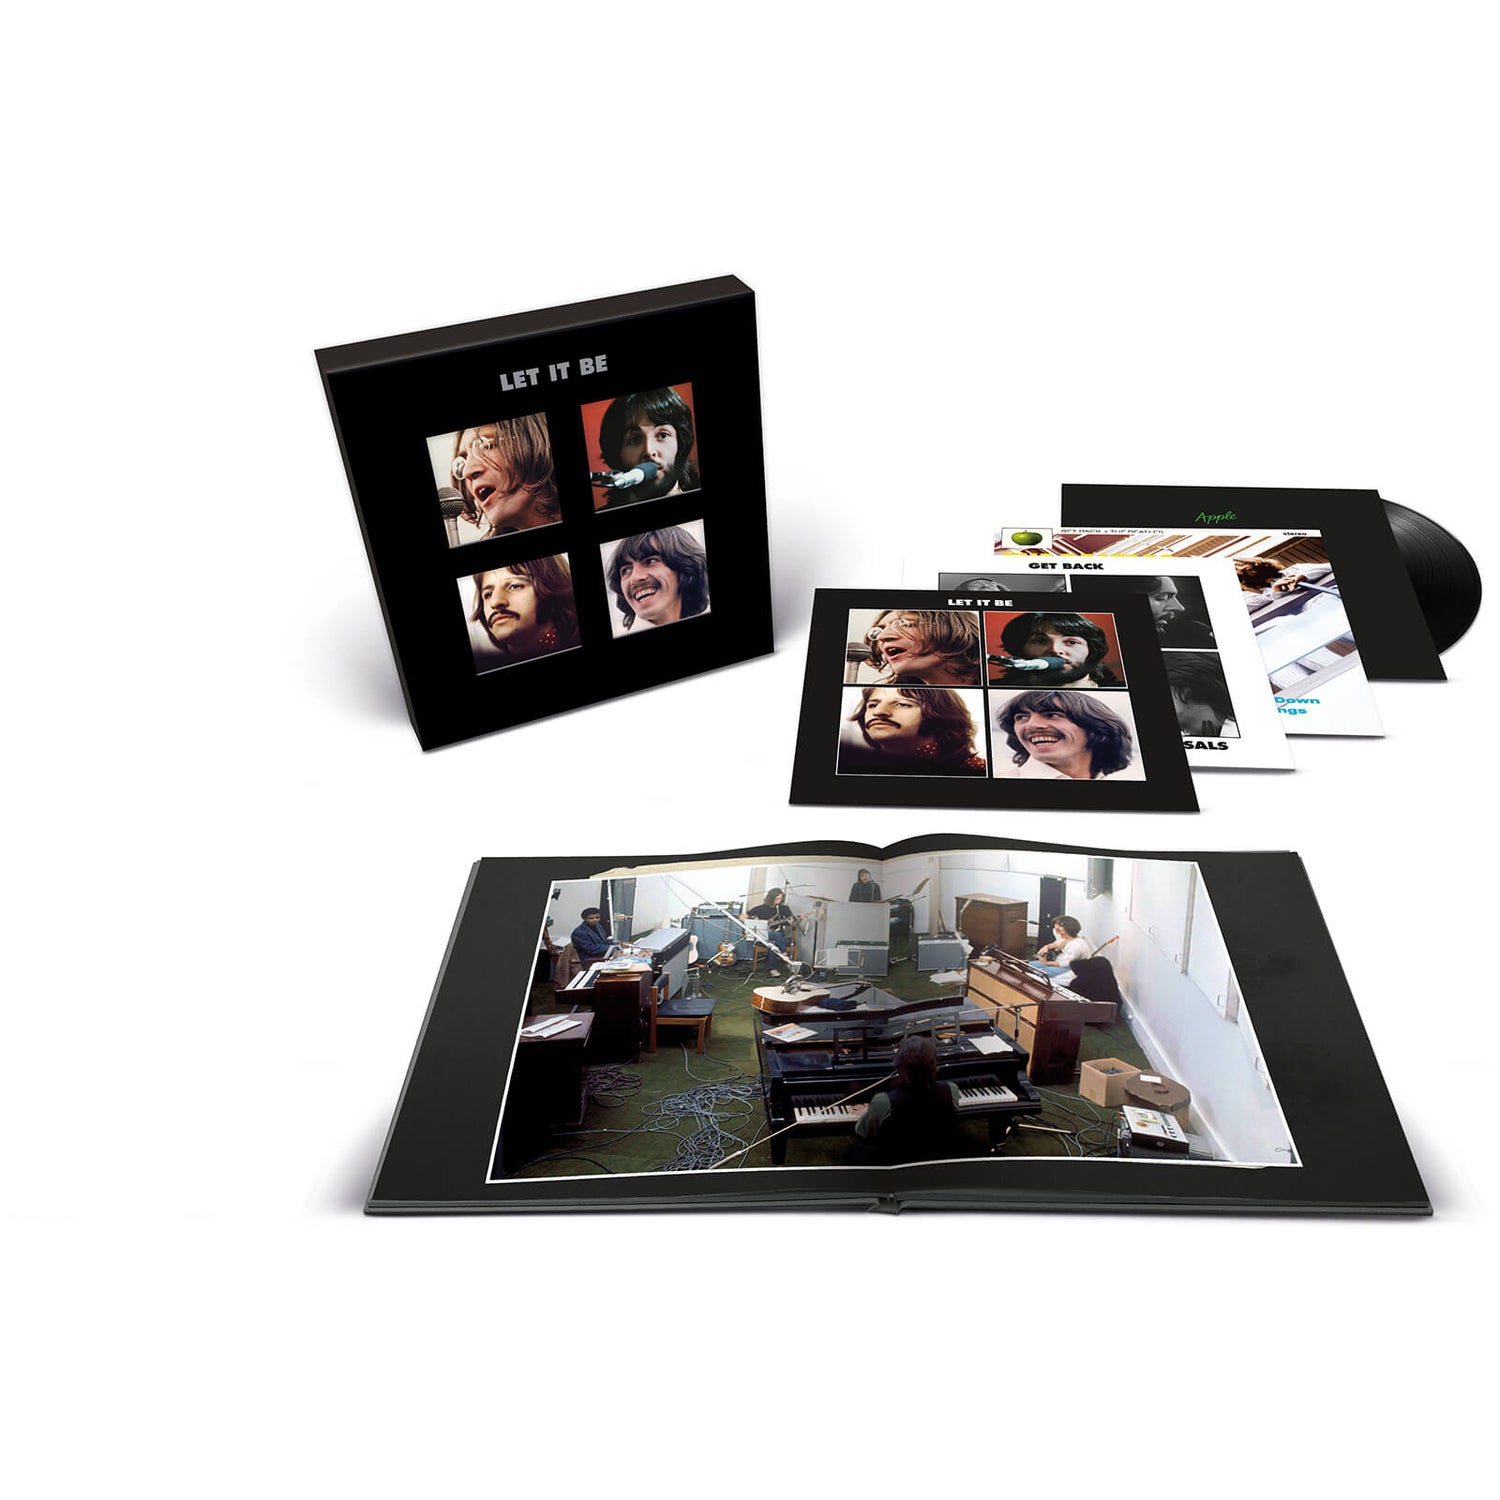 The Beatles - Let It Be (Special Edition) (Super Deluxe) Vinyl Box Set + 12" EP